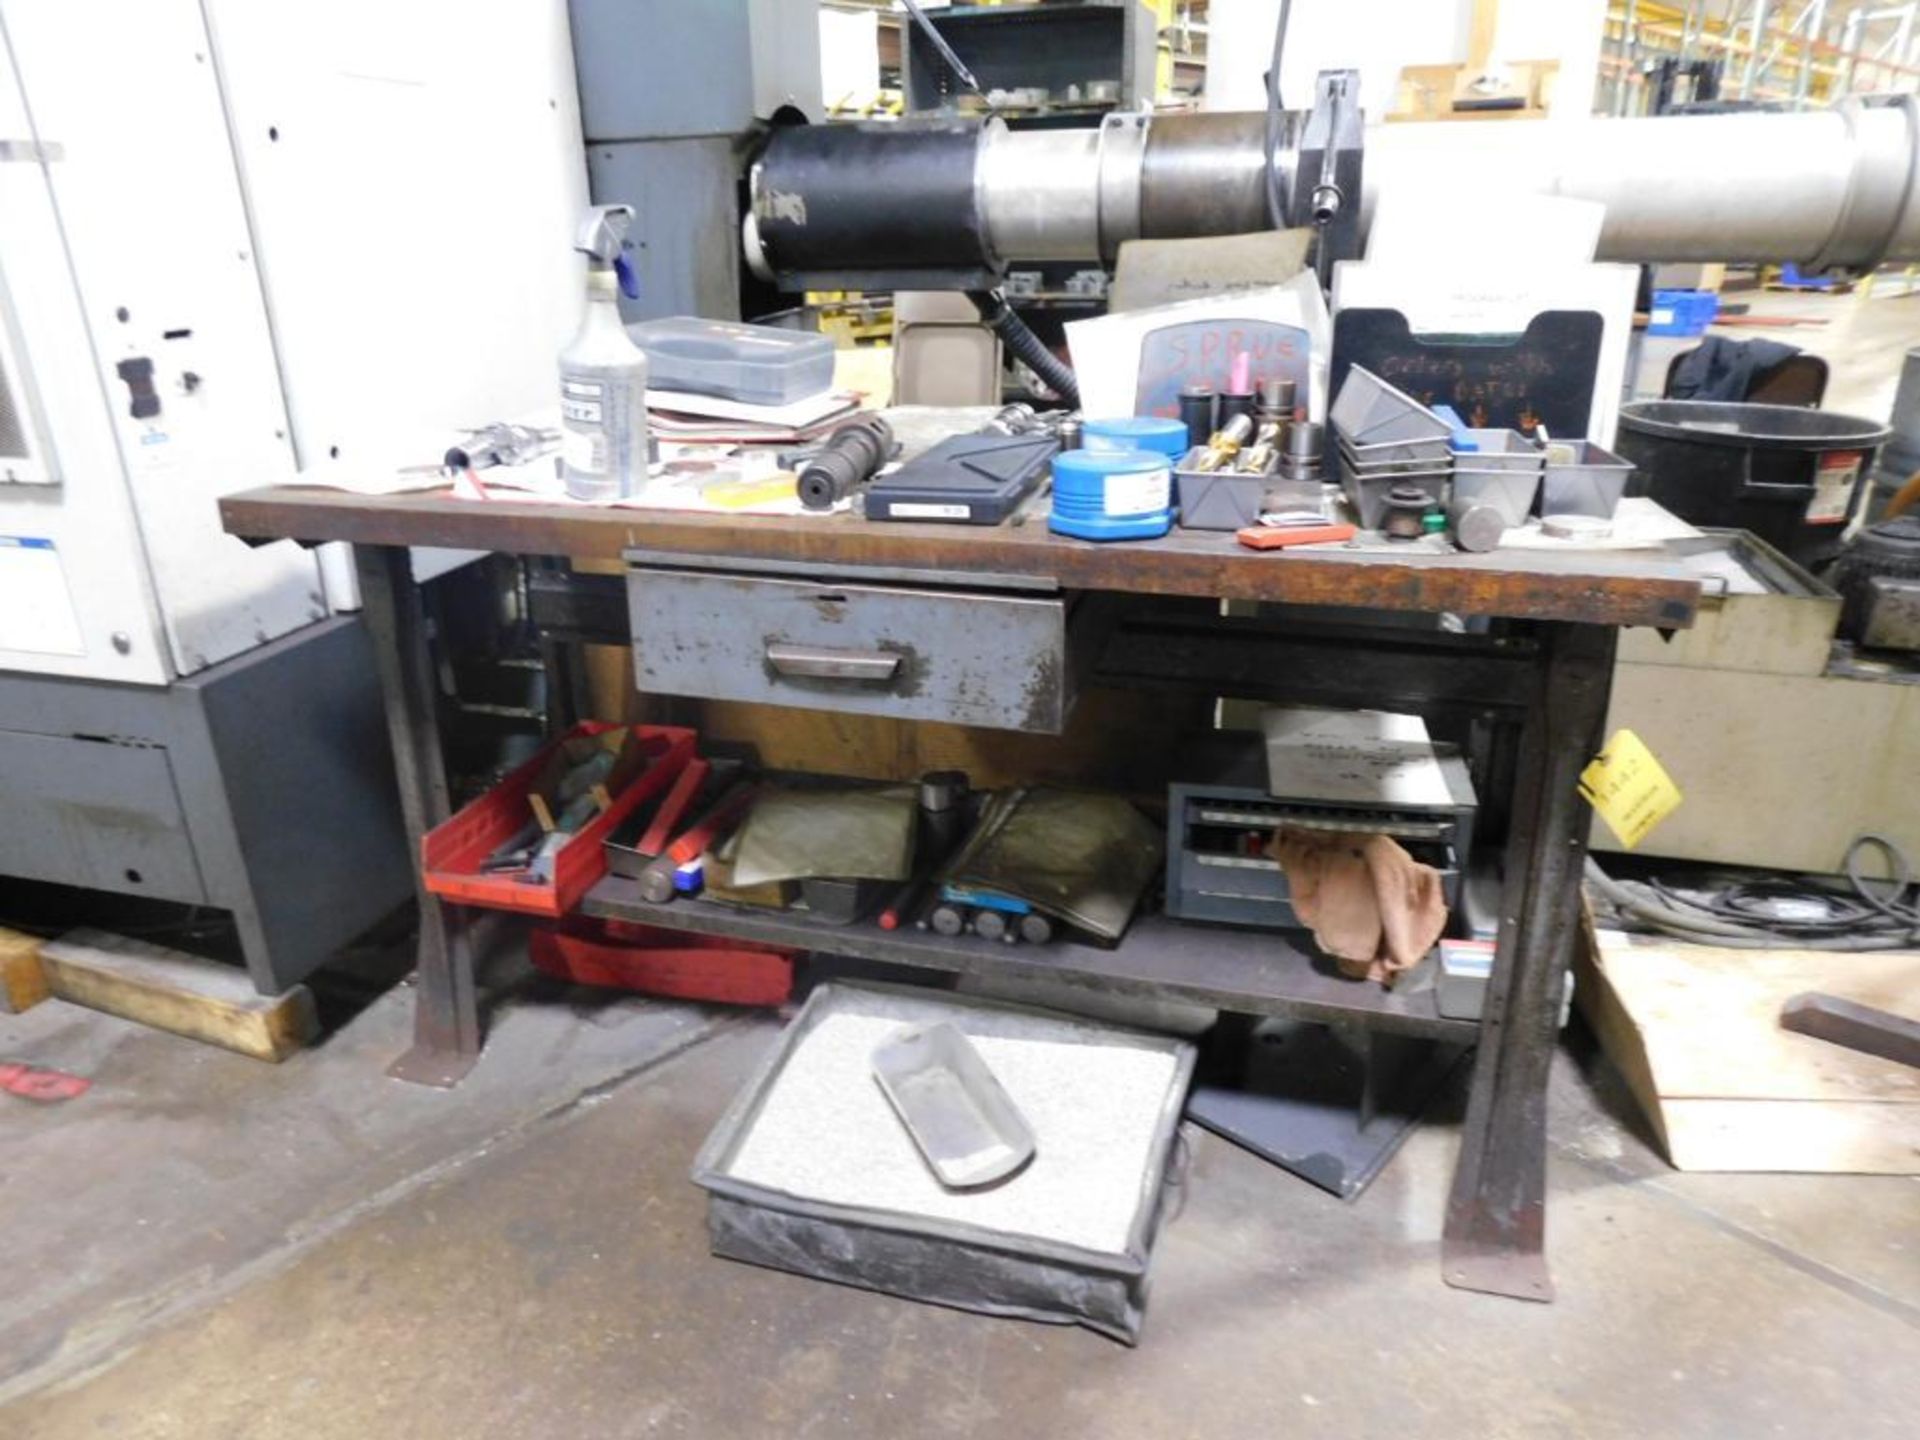 LOT: (3) Workbenches, Cabinet, Shelf, Wood Table (NO CONTENTS) (DELAYED REMOVAL, CONTACT SITE MANAGE